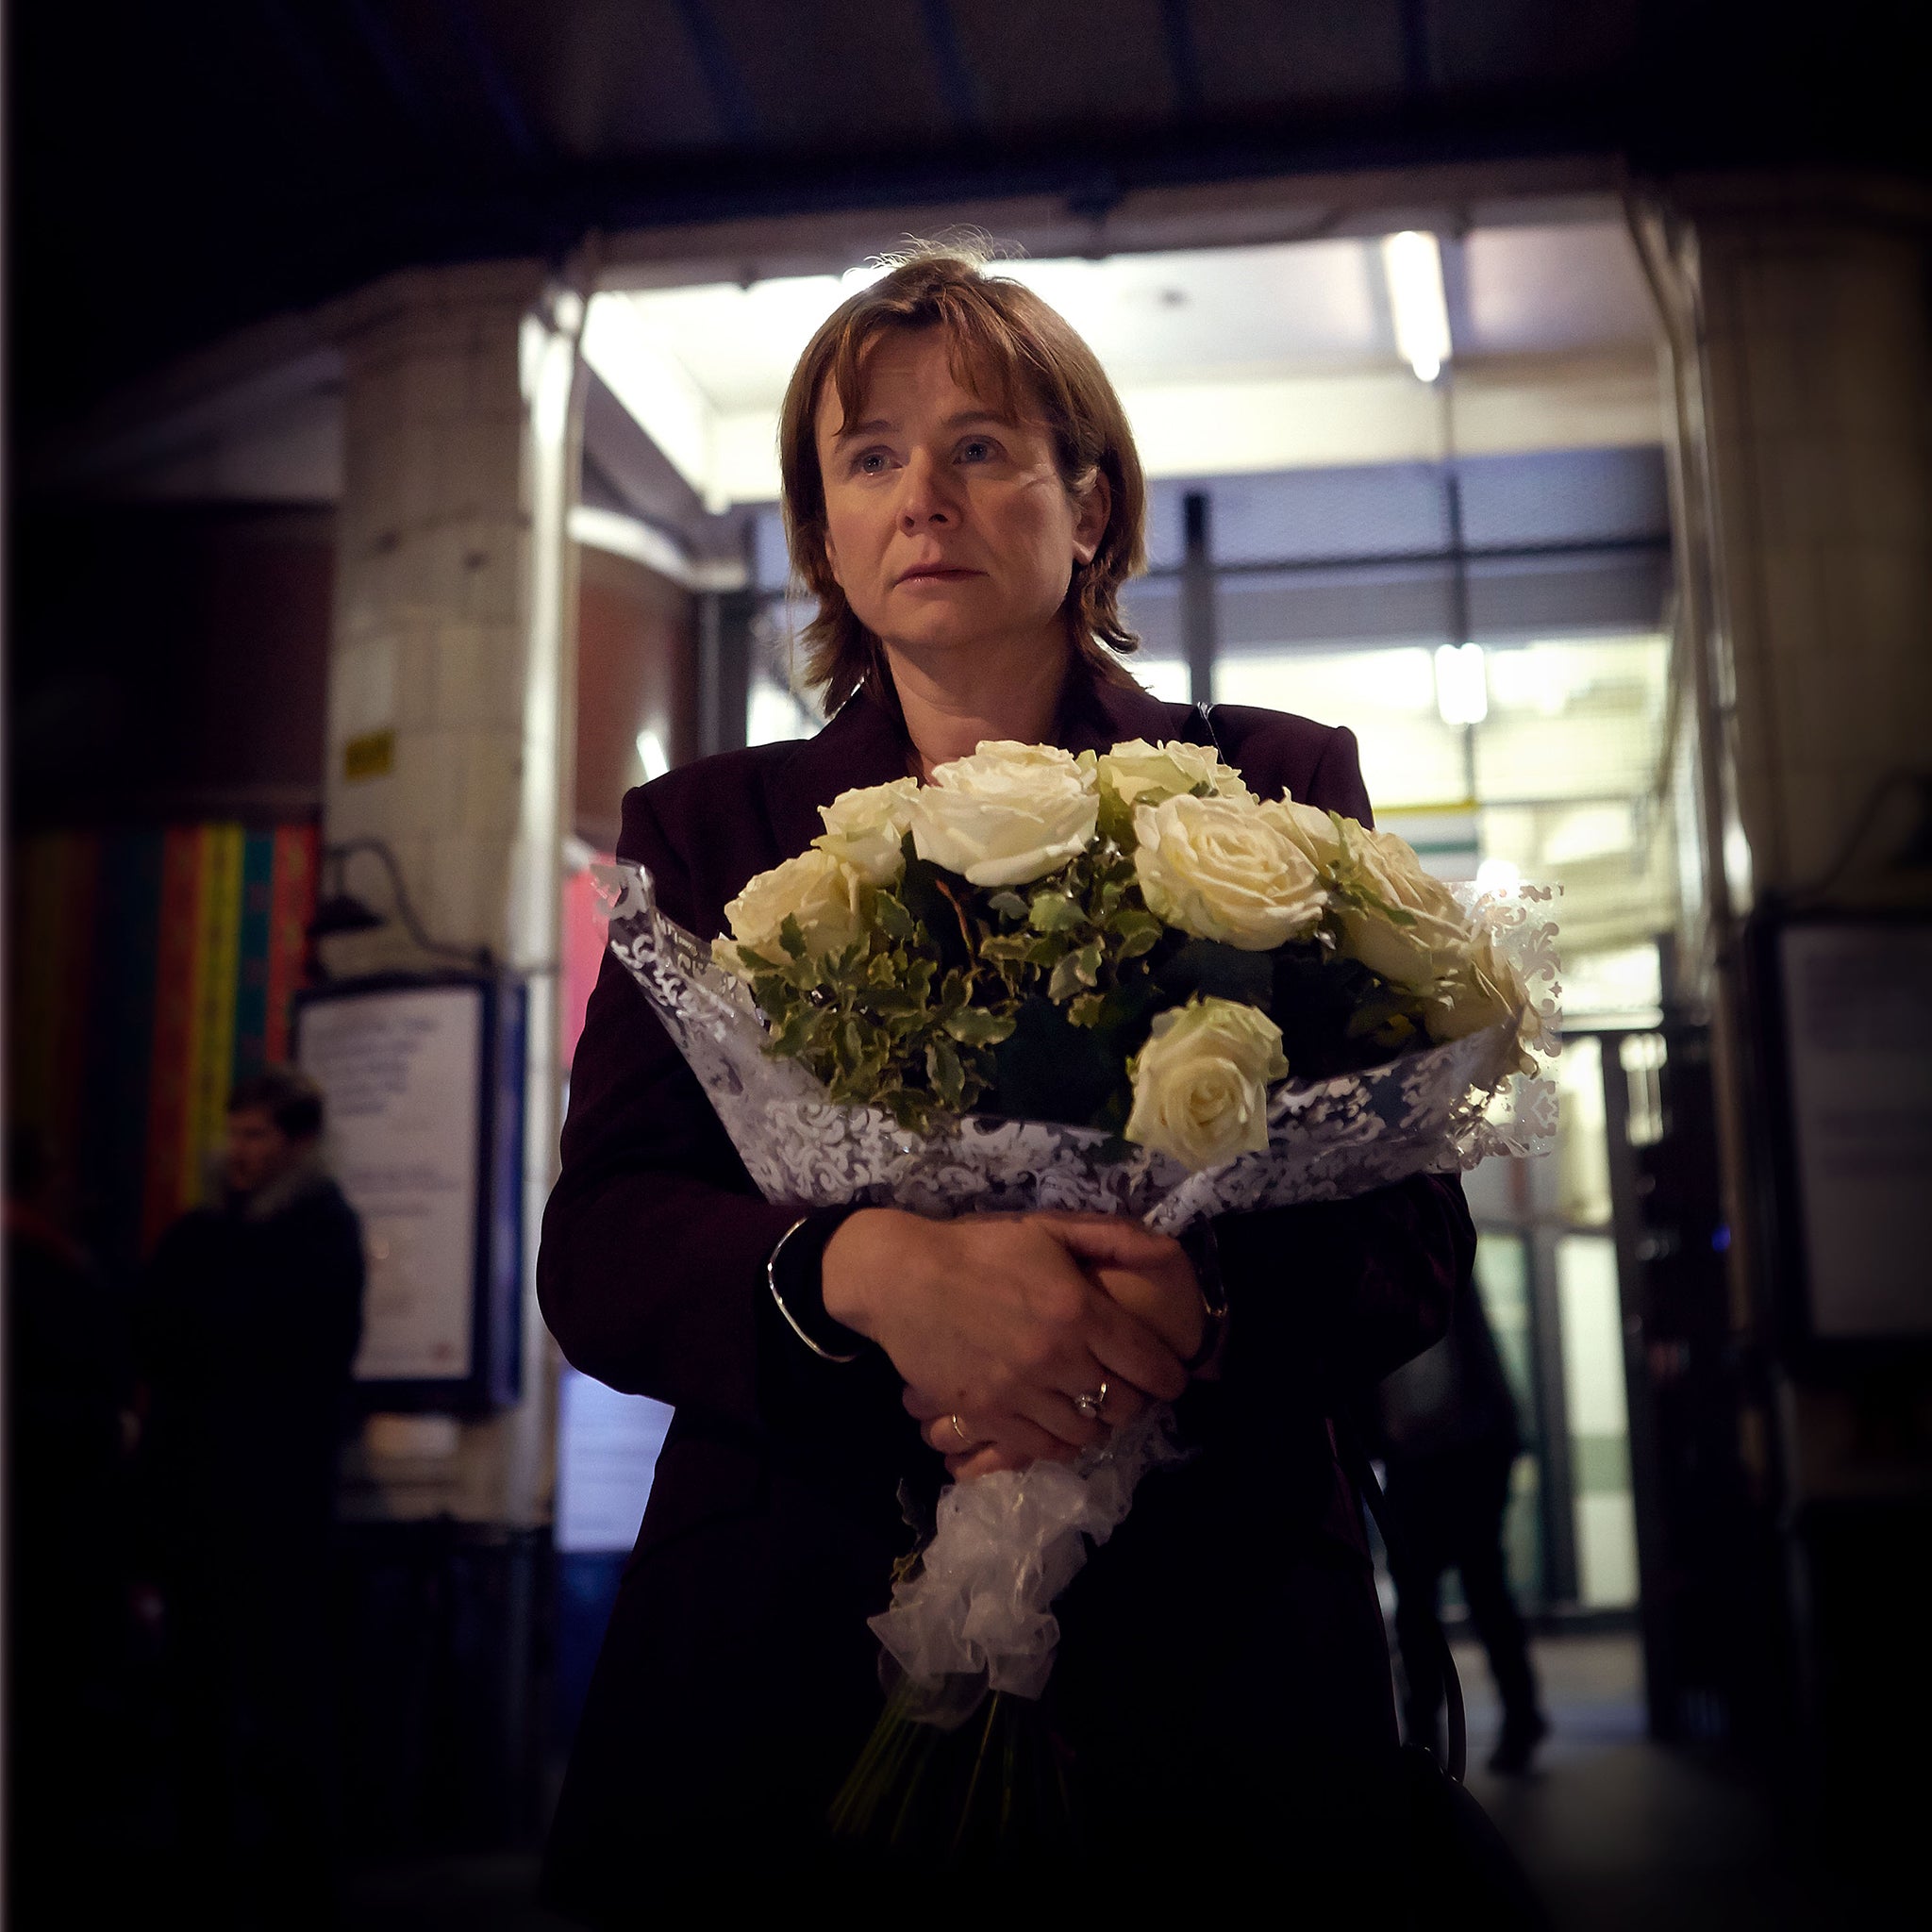 Grief: Emily Watson as Julie Nicholson in ‘A Song for Jenny’